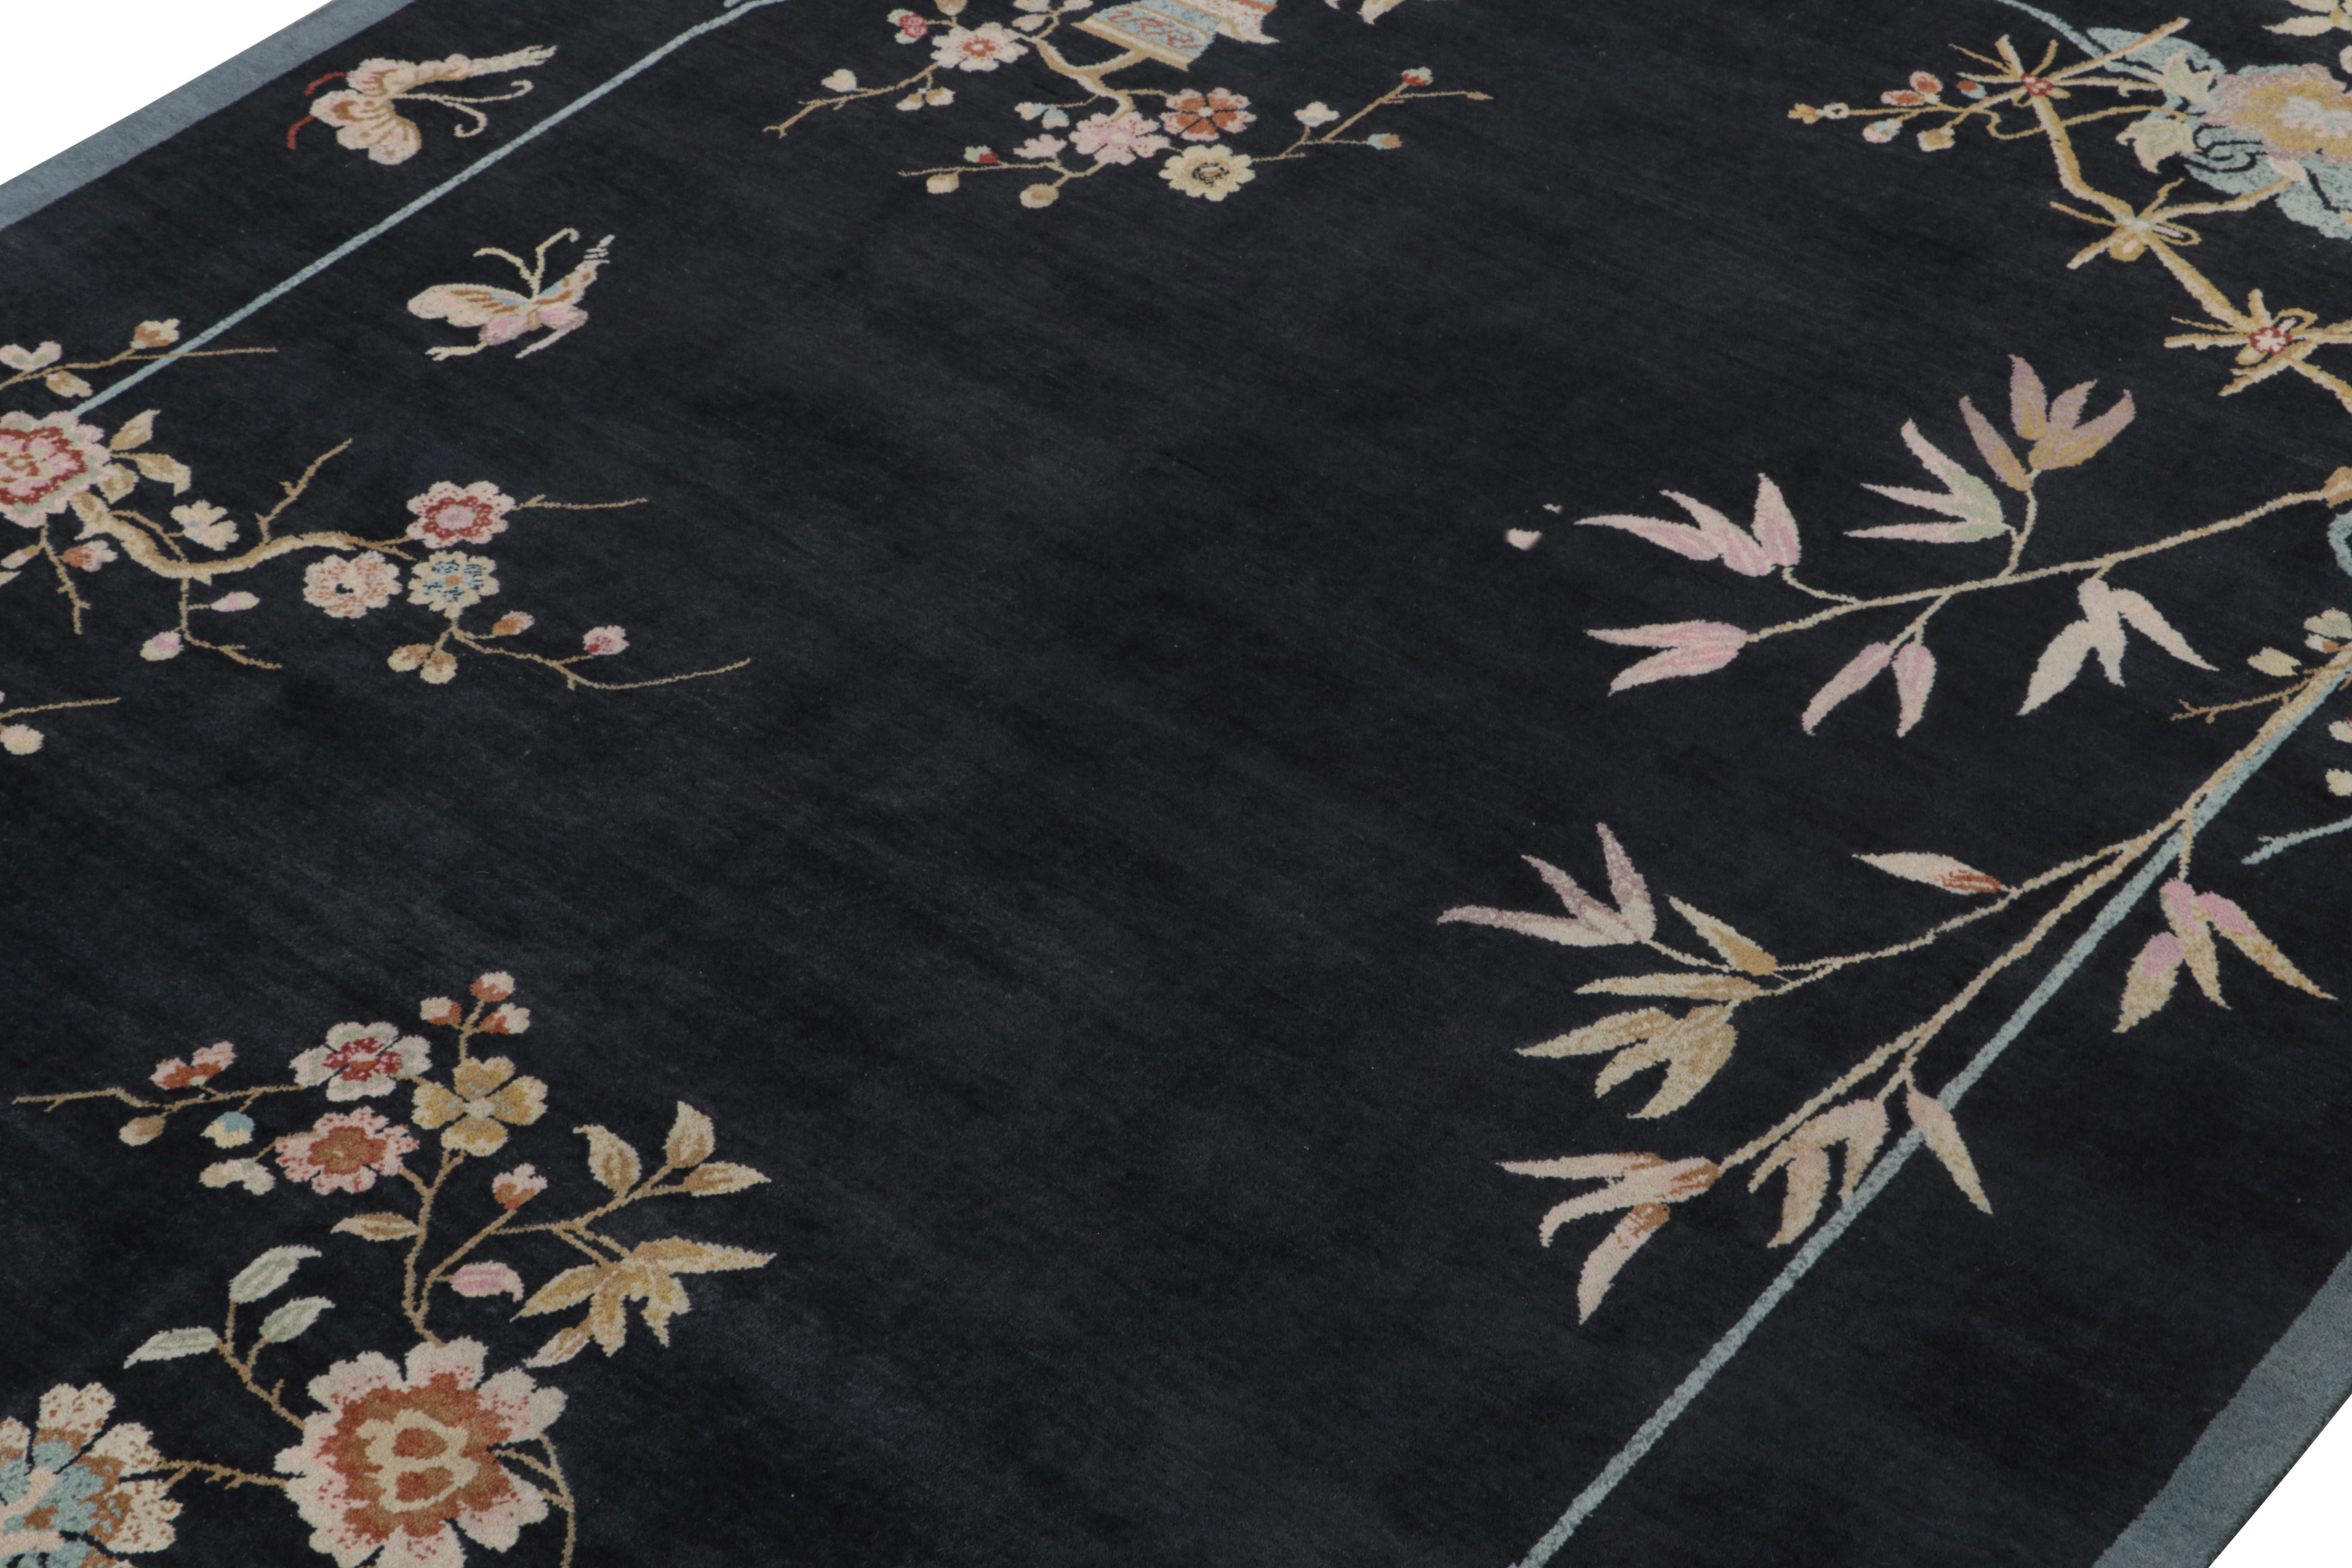 This 9x12 ode to Chinese Art Deco rugs is the next addition to Rug & Kilim’s newly inspired Deco Collection. Hand-knotted in wool.

Further on the Design: 

This piece boasts the minimalist Deco style of the 1920s and reimagines it with new